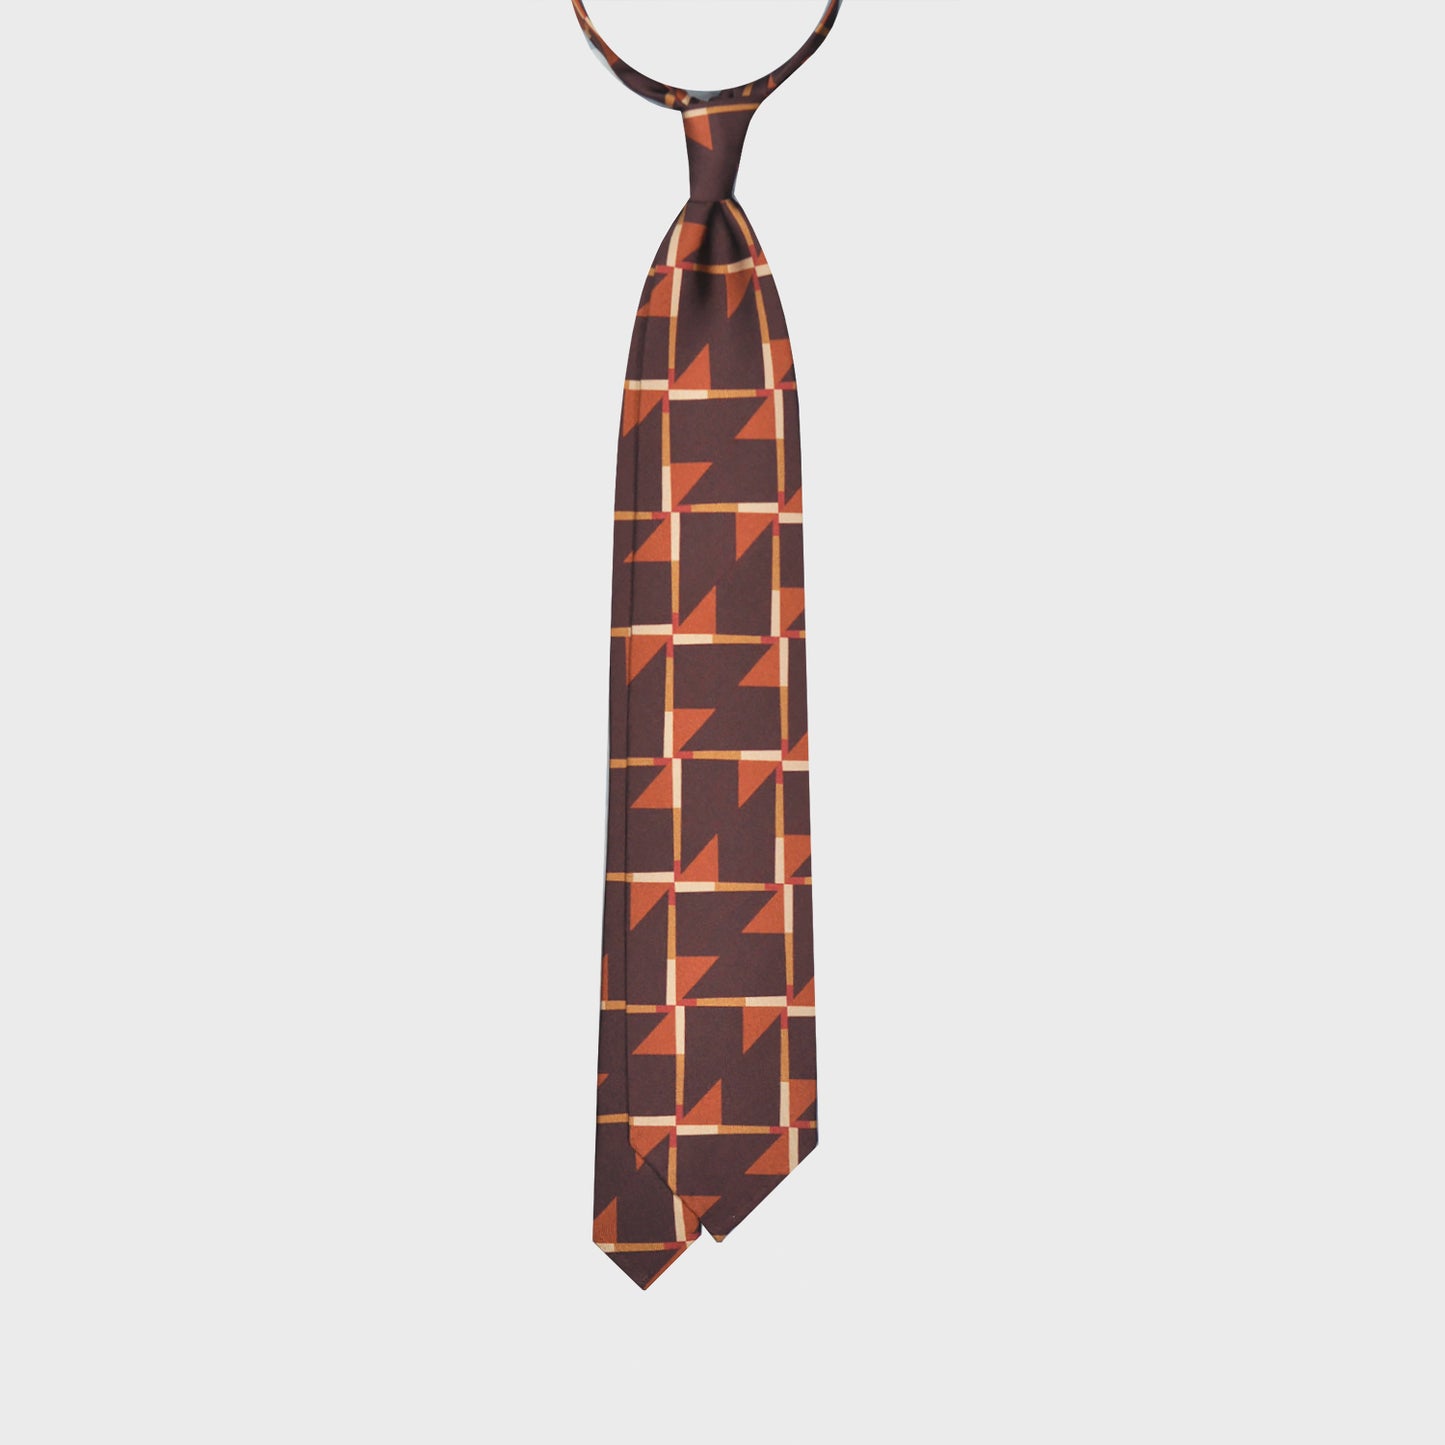 Refined deco tie made with finest Italian silk soft to the touch, coffee brown background with orange and ocra Art Decò pattern, unlined tie 3 folds, this Art Deco ties is a exclusive pattern made by Wools Boutique Uomo